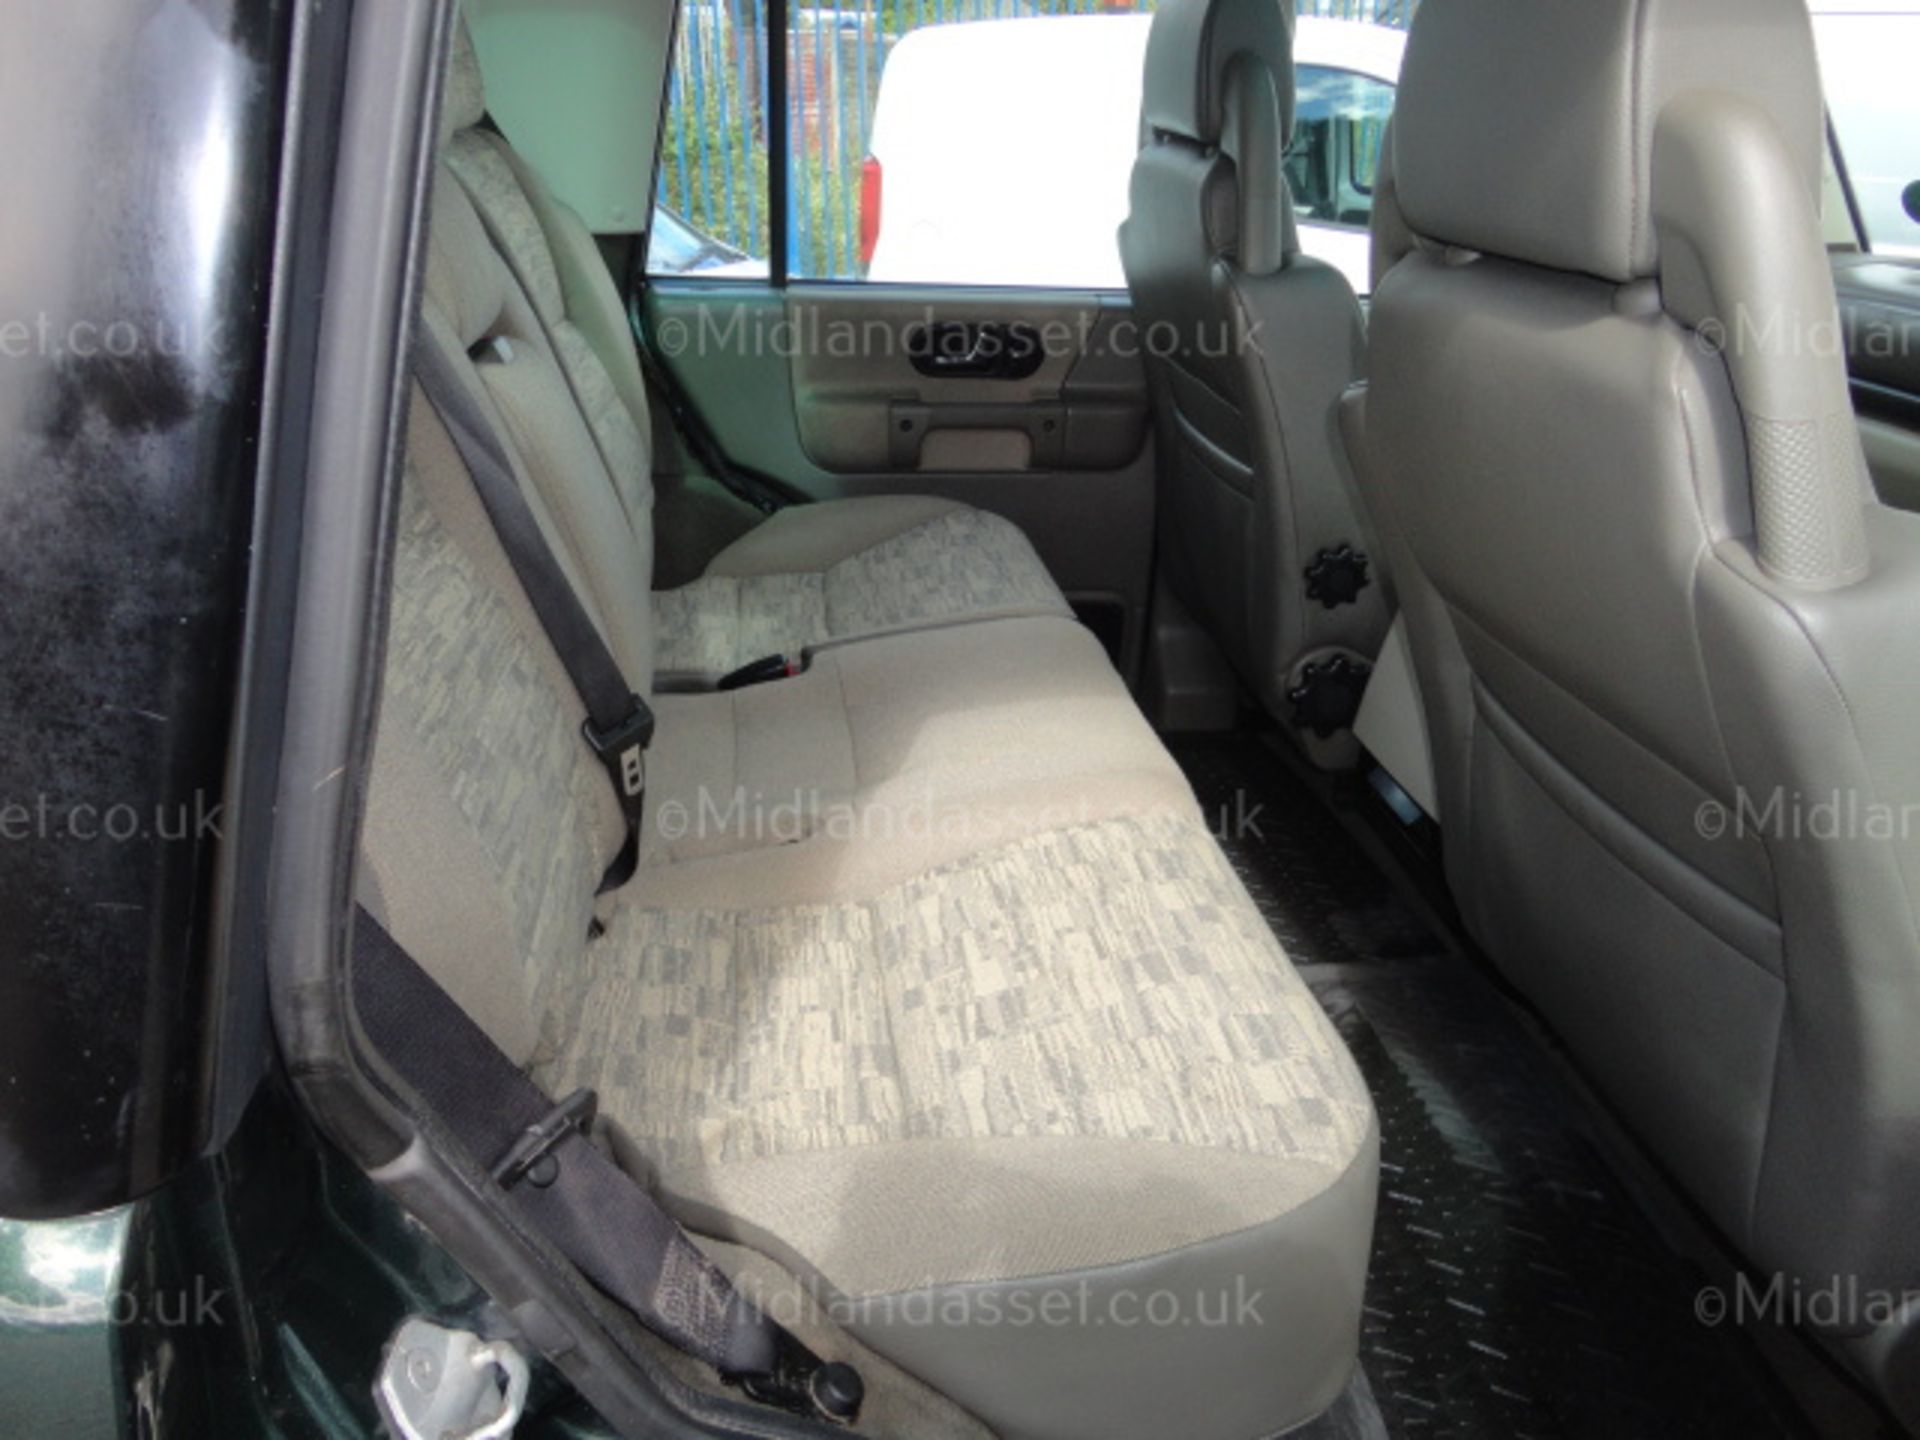 2002/52 REG LAND ROVER DISCOVERY TD5 GS AUTO 5 DOOR ESTATE FULL SERVICE HISTORY *NO VAT* - Image 5 of 6